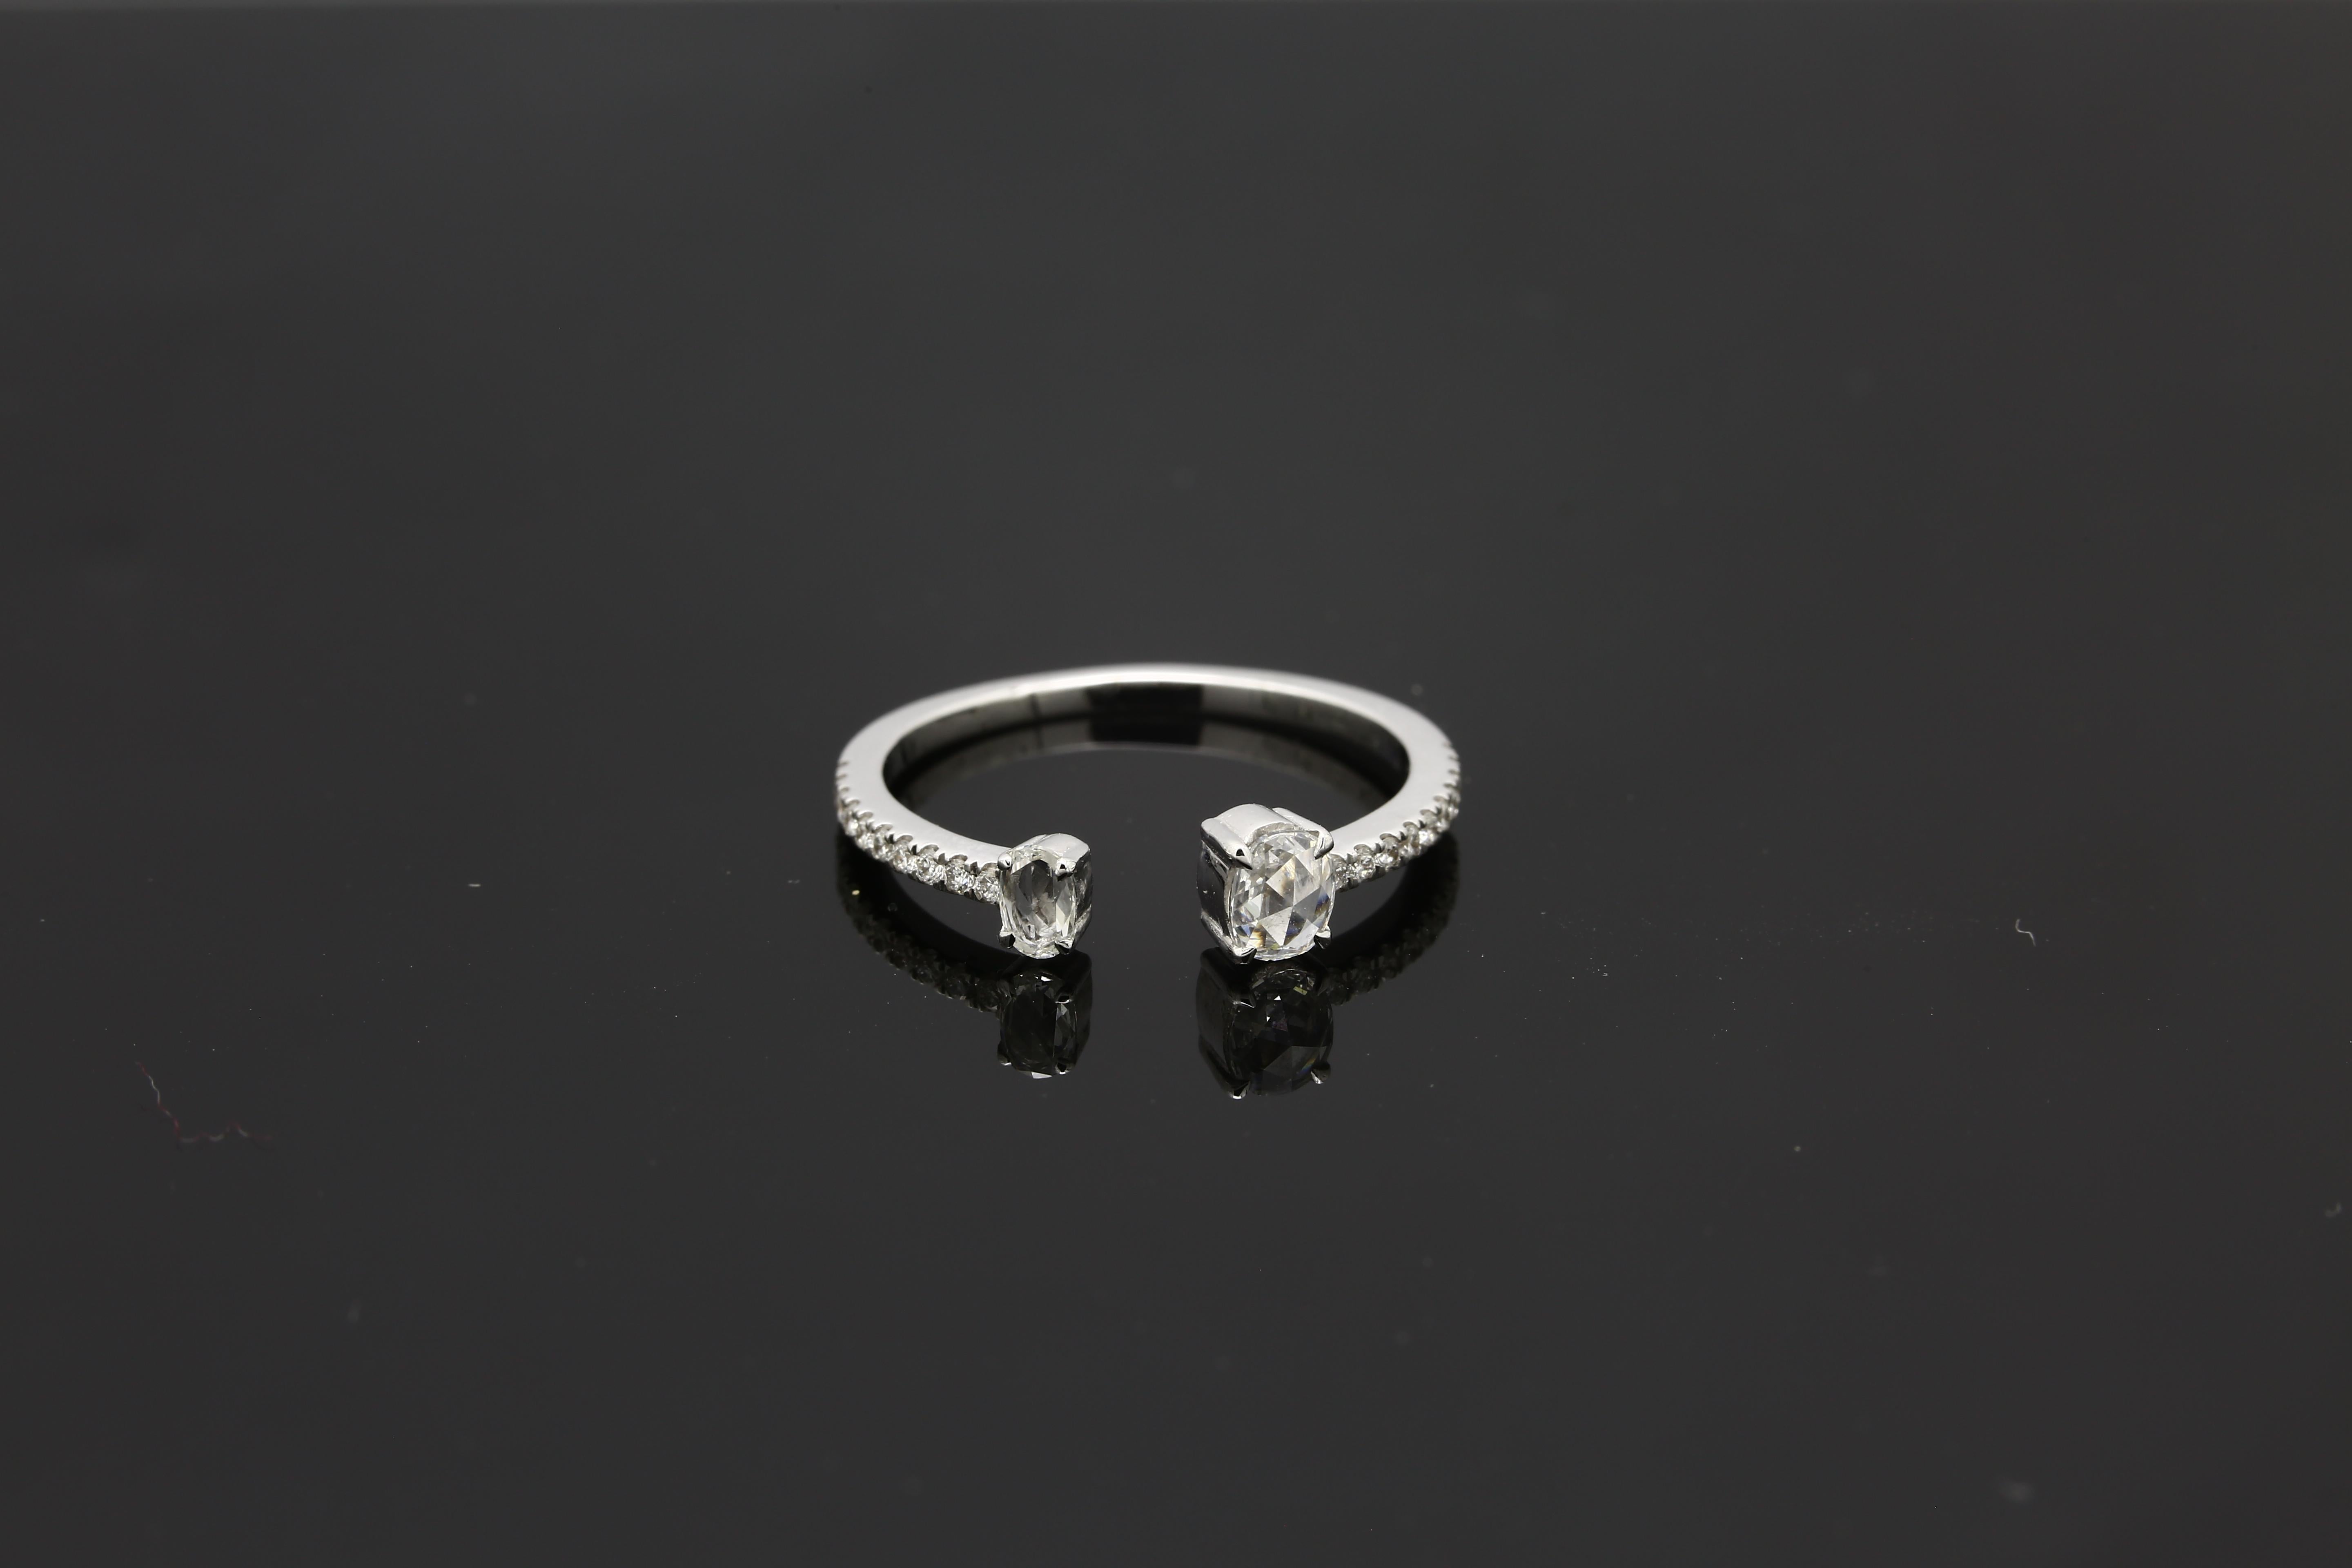 PANIM 0.38 Carat Ring with Diamond Rosecut in 18K White Gold

Set in 18K White Gold with top quality Rosecuts shapes in Pear.

Colour G+
Quality VVS/VS

Contact us on this platform to get more details